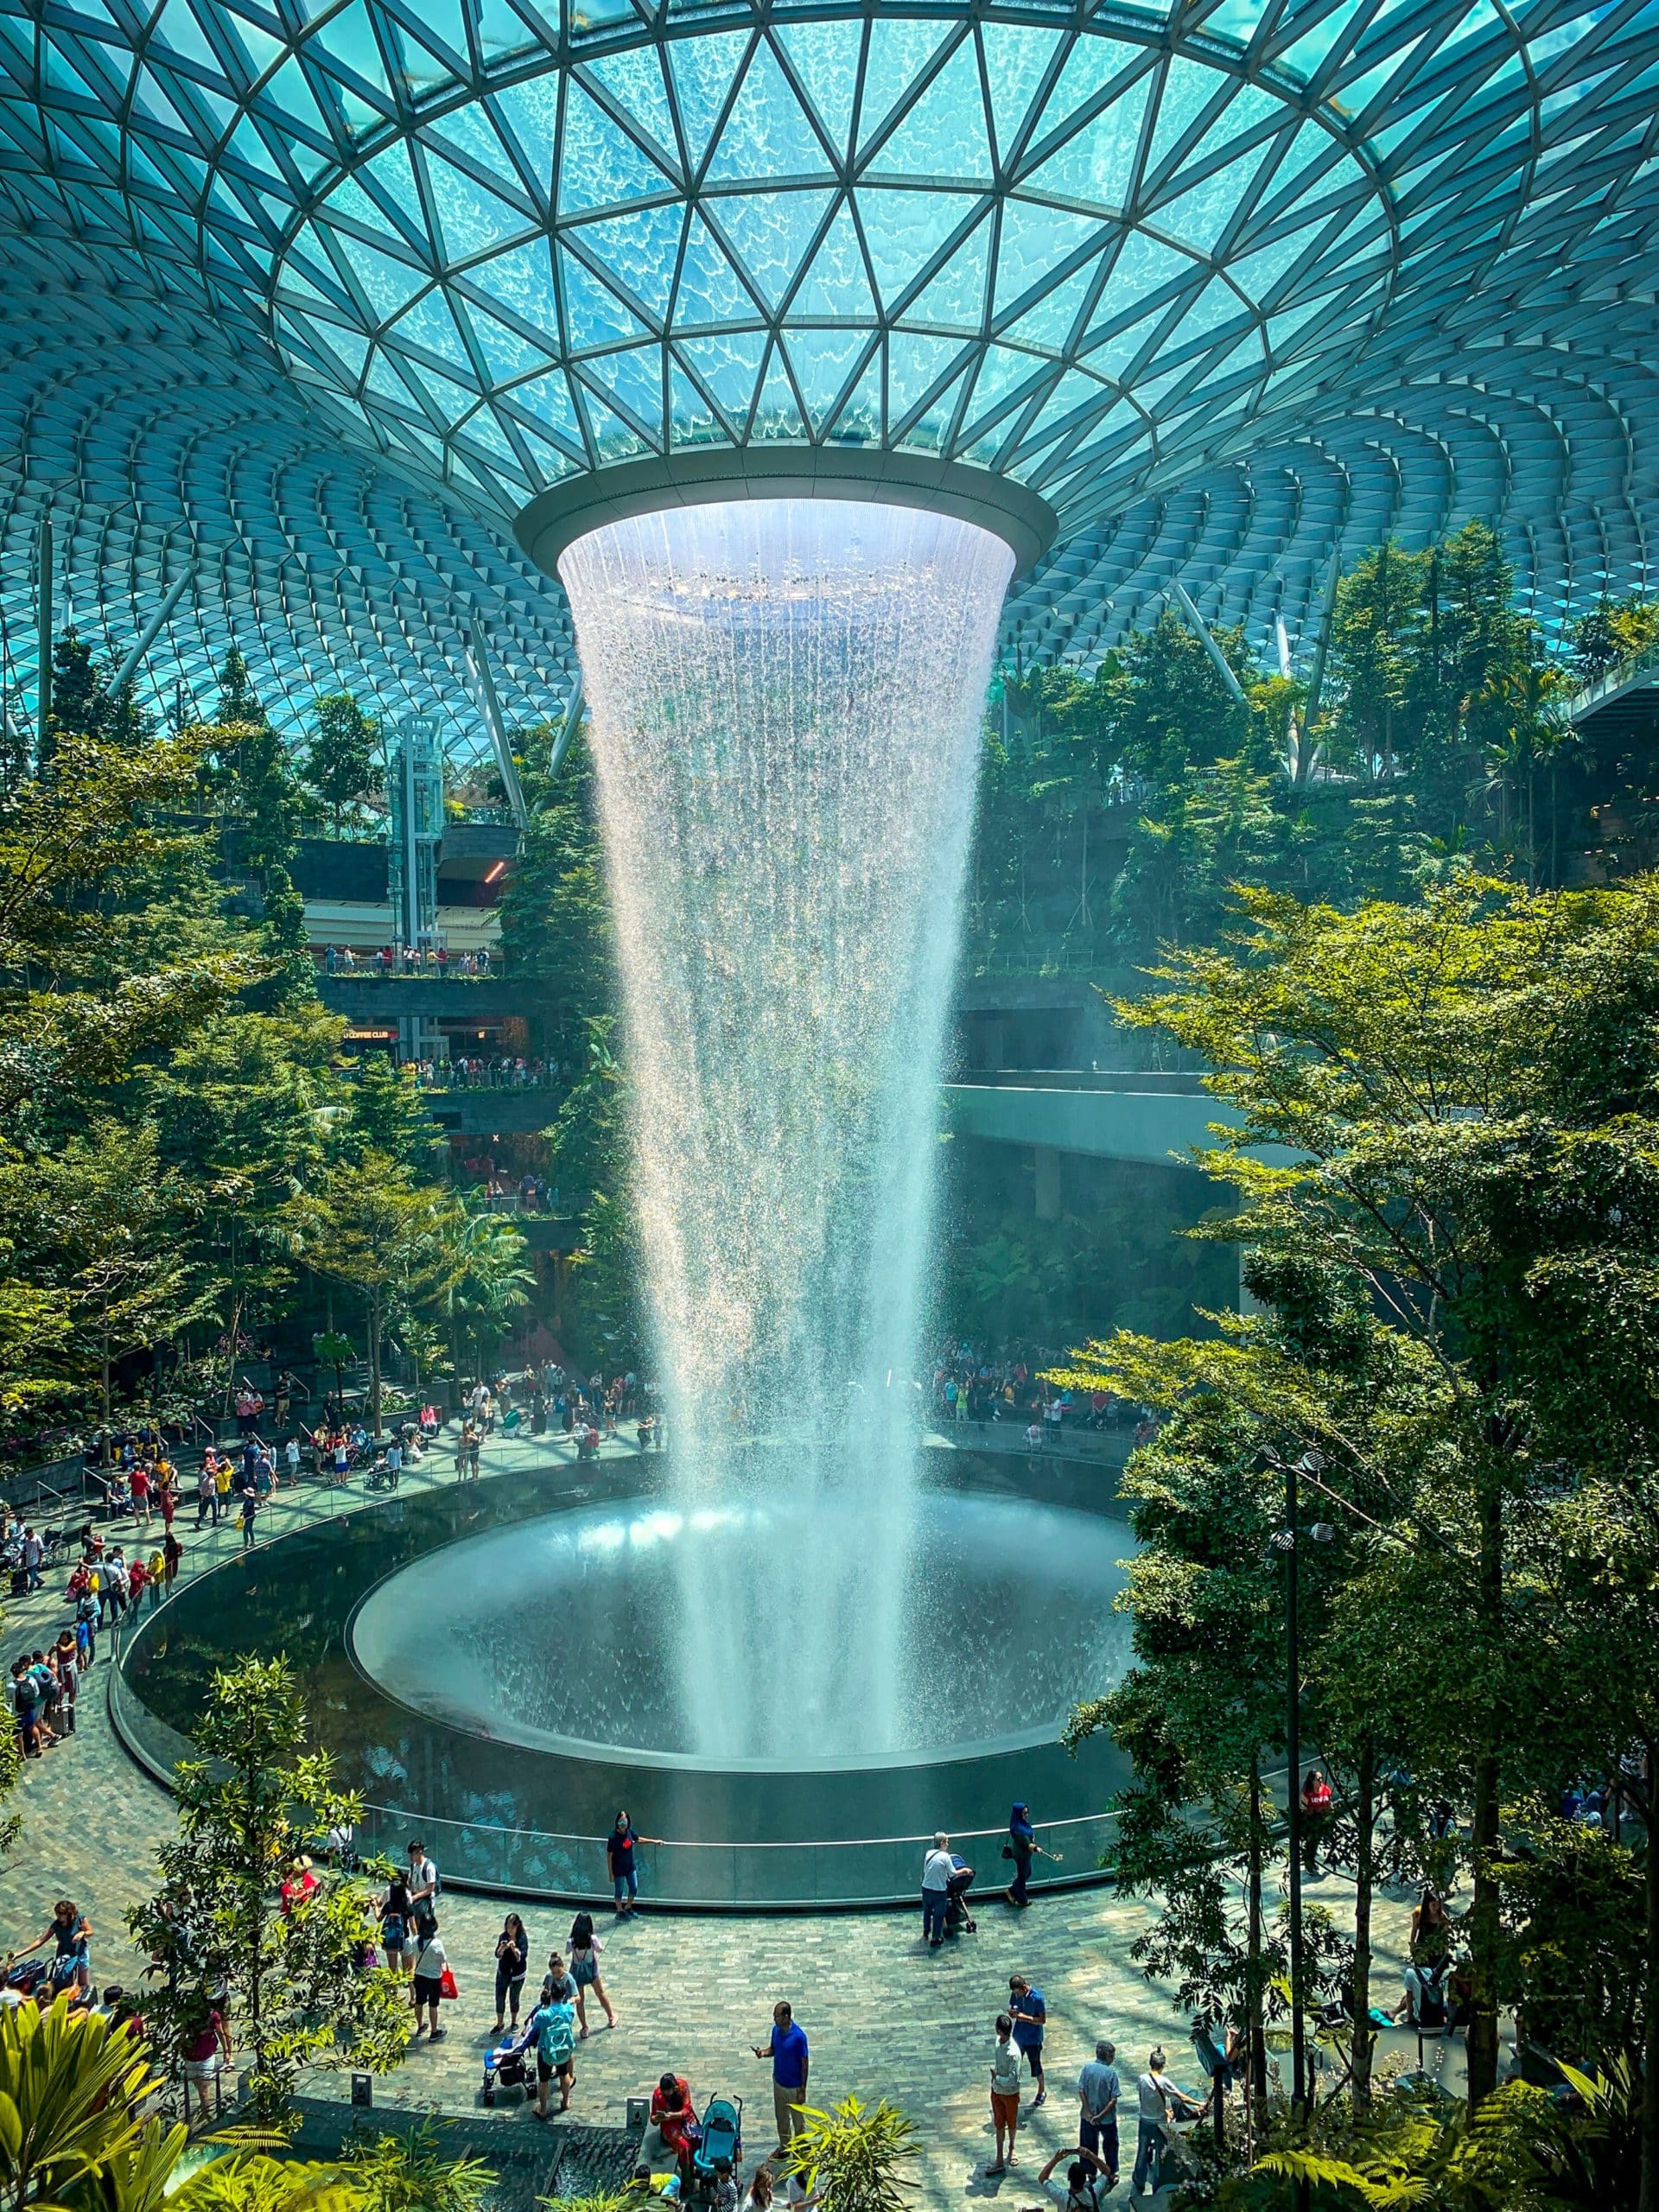 Singapore Changi Airport Named World's Best: 10 Coolest Things I Saw